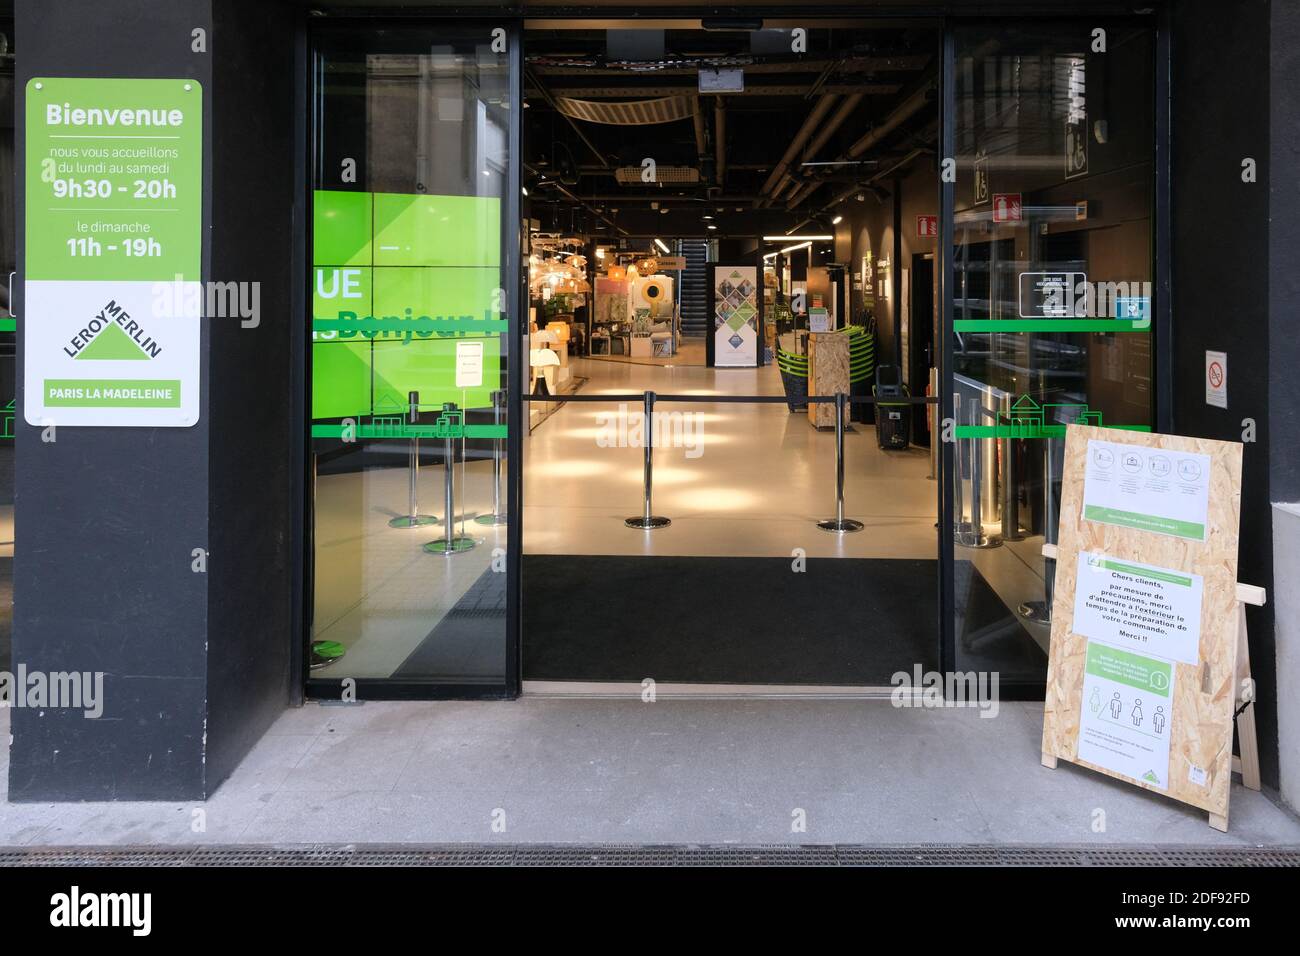 Leroy Merlin Madeleine Store, Paris, France on April 8, 2020. Some  do-it-yourself stores offer Internet ordering and drive-through systems to  help slow the spread of coronavirus disease. Des protocoles très stricts ont